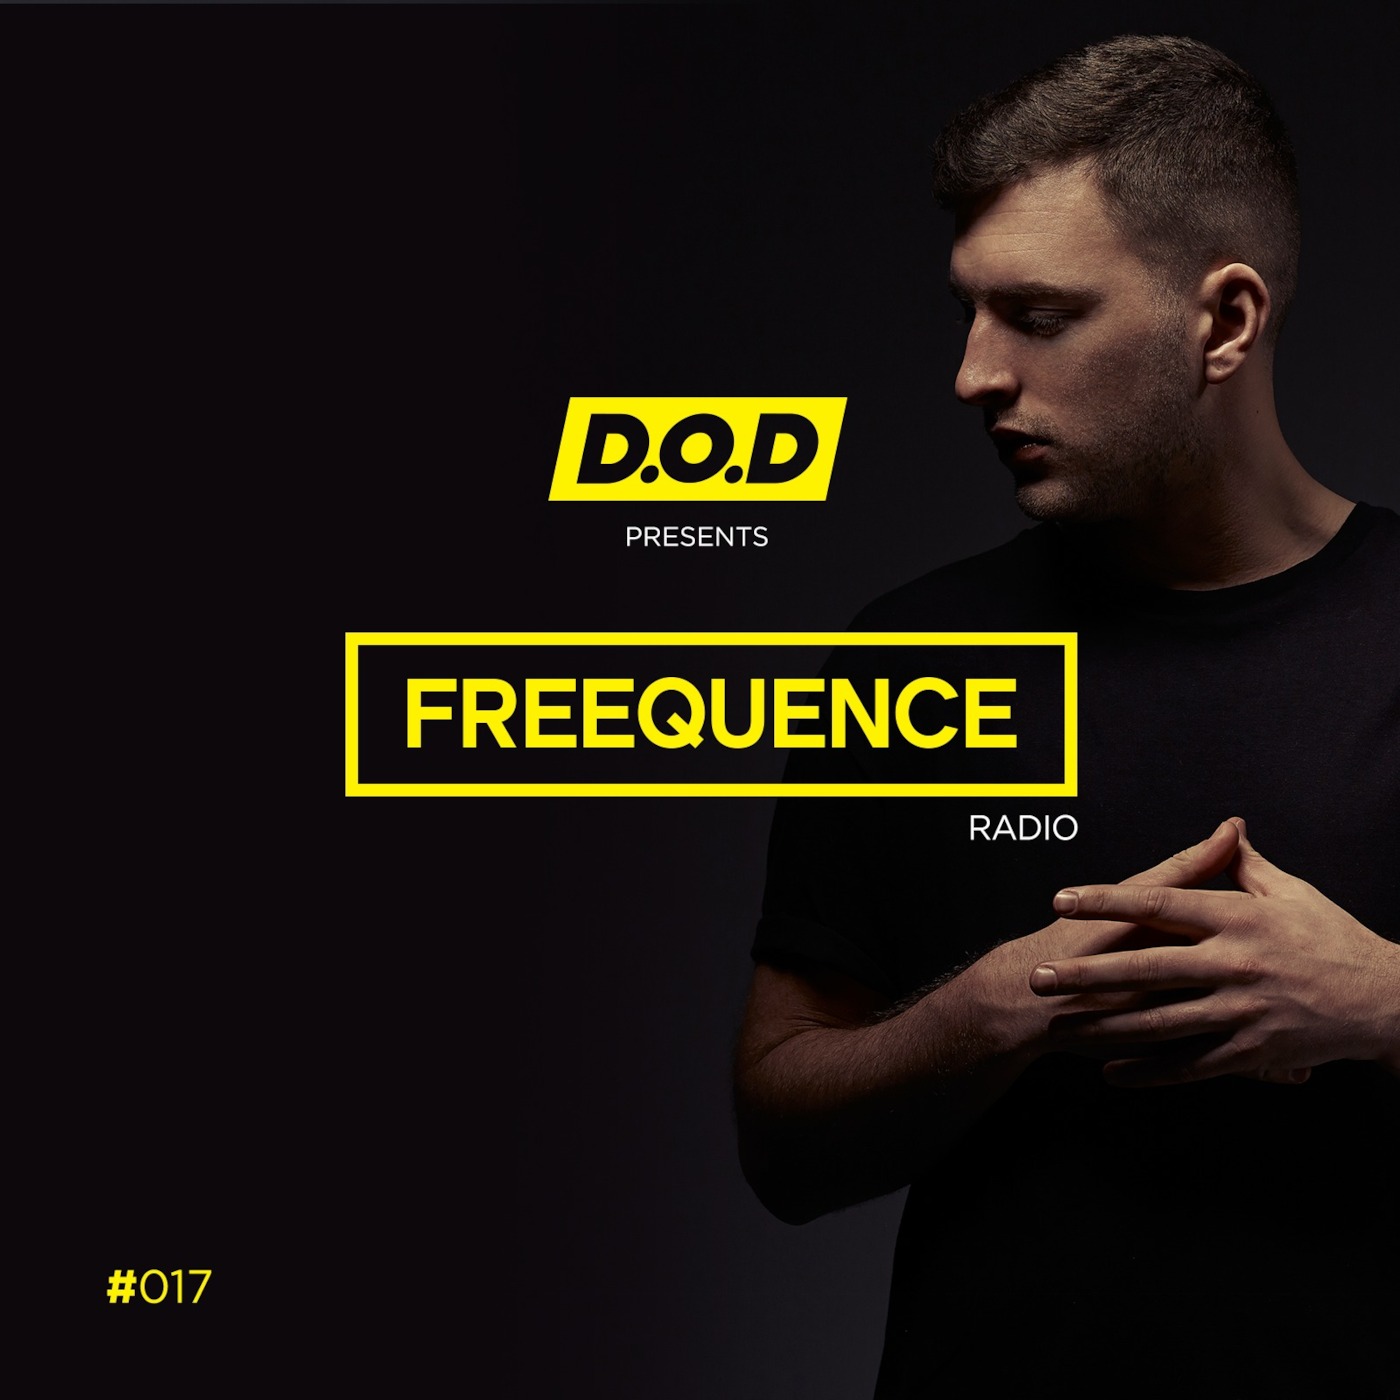 #FREEQUENCE Radio with D.O.D #017